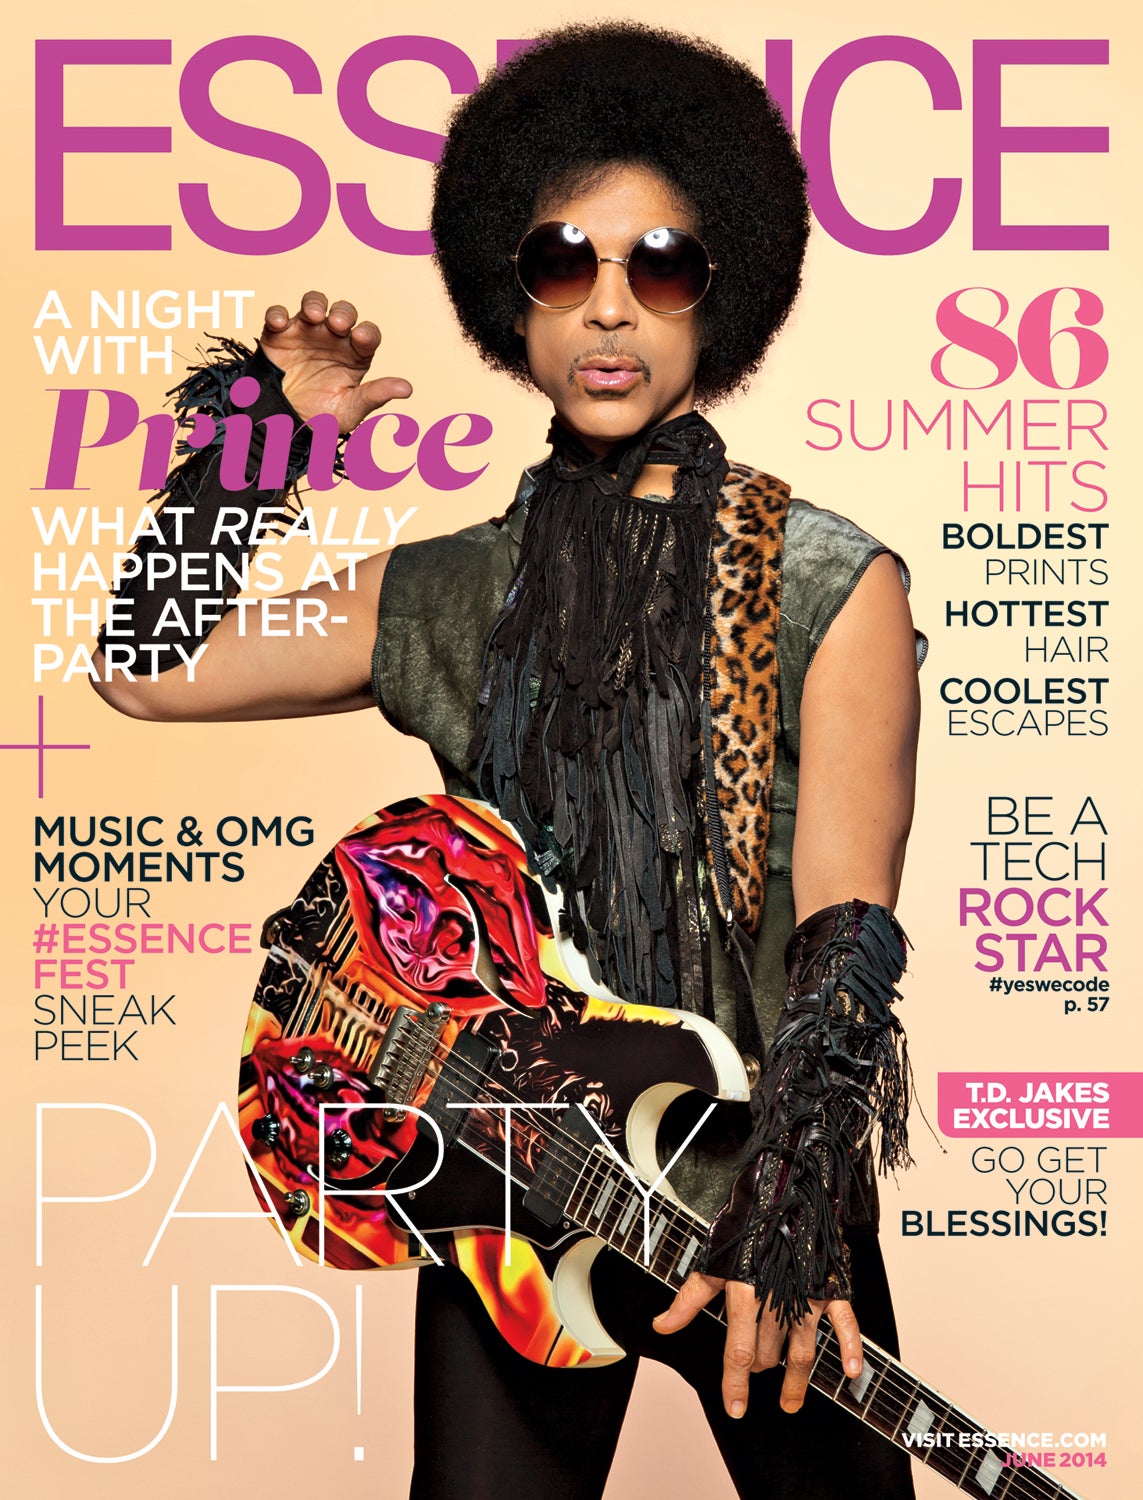 Prince Rocks the Cover of ESSENCE's June Issue